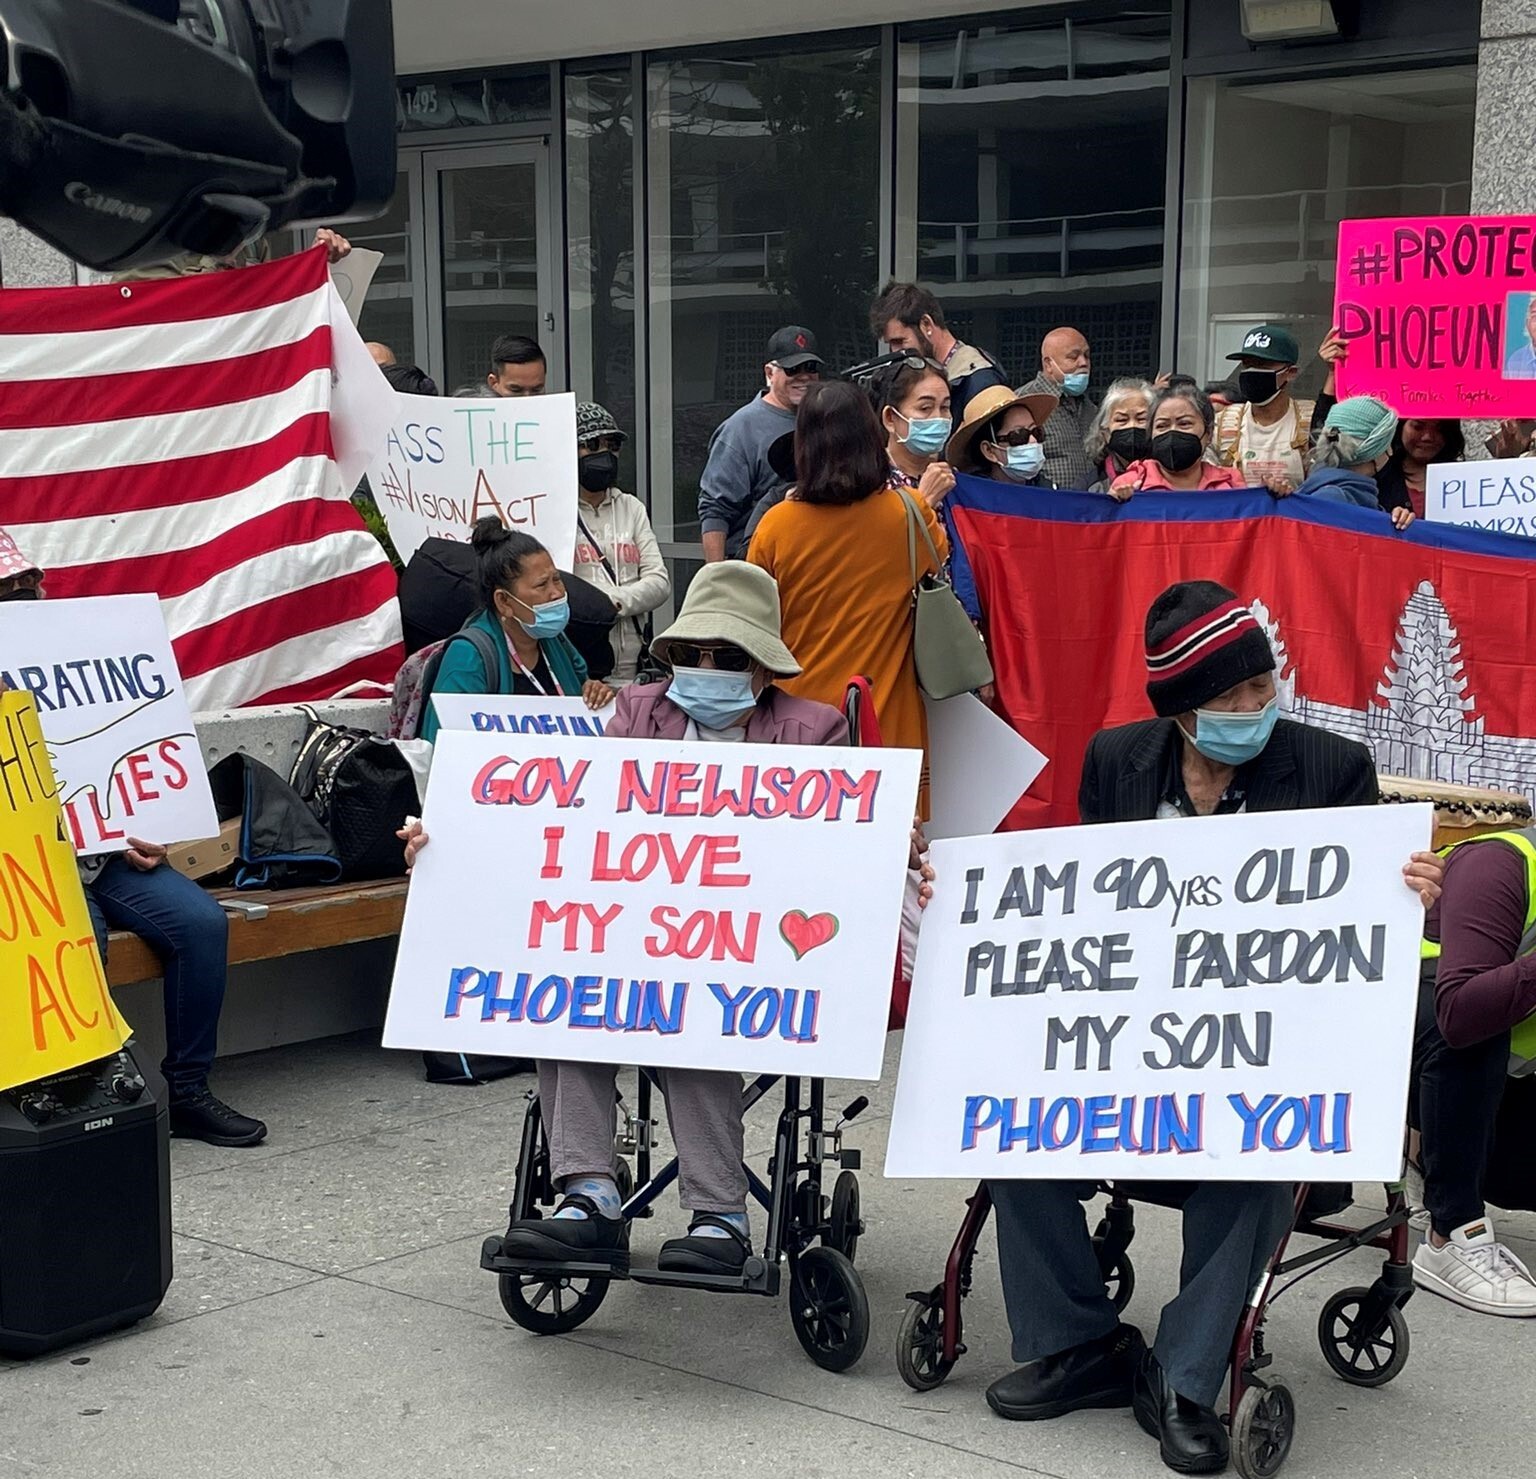 Phoeun You's elderly parents in wheelchairs hold signs at a rally that read "I love my son" "Please pardon my son"